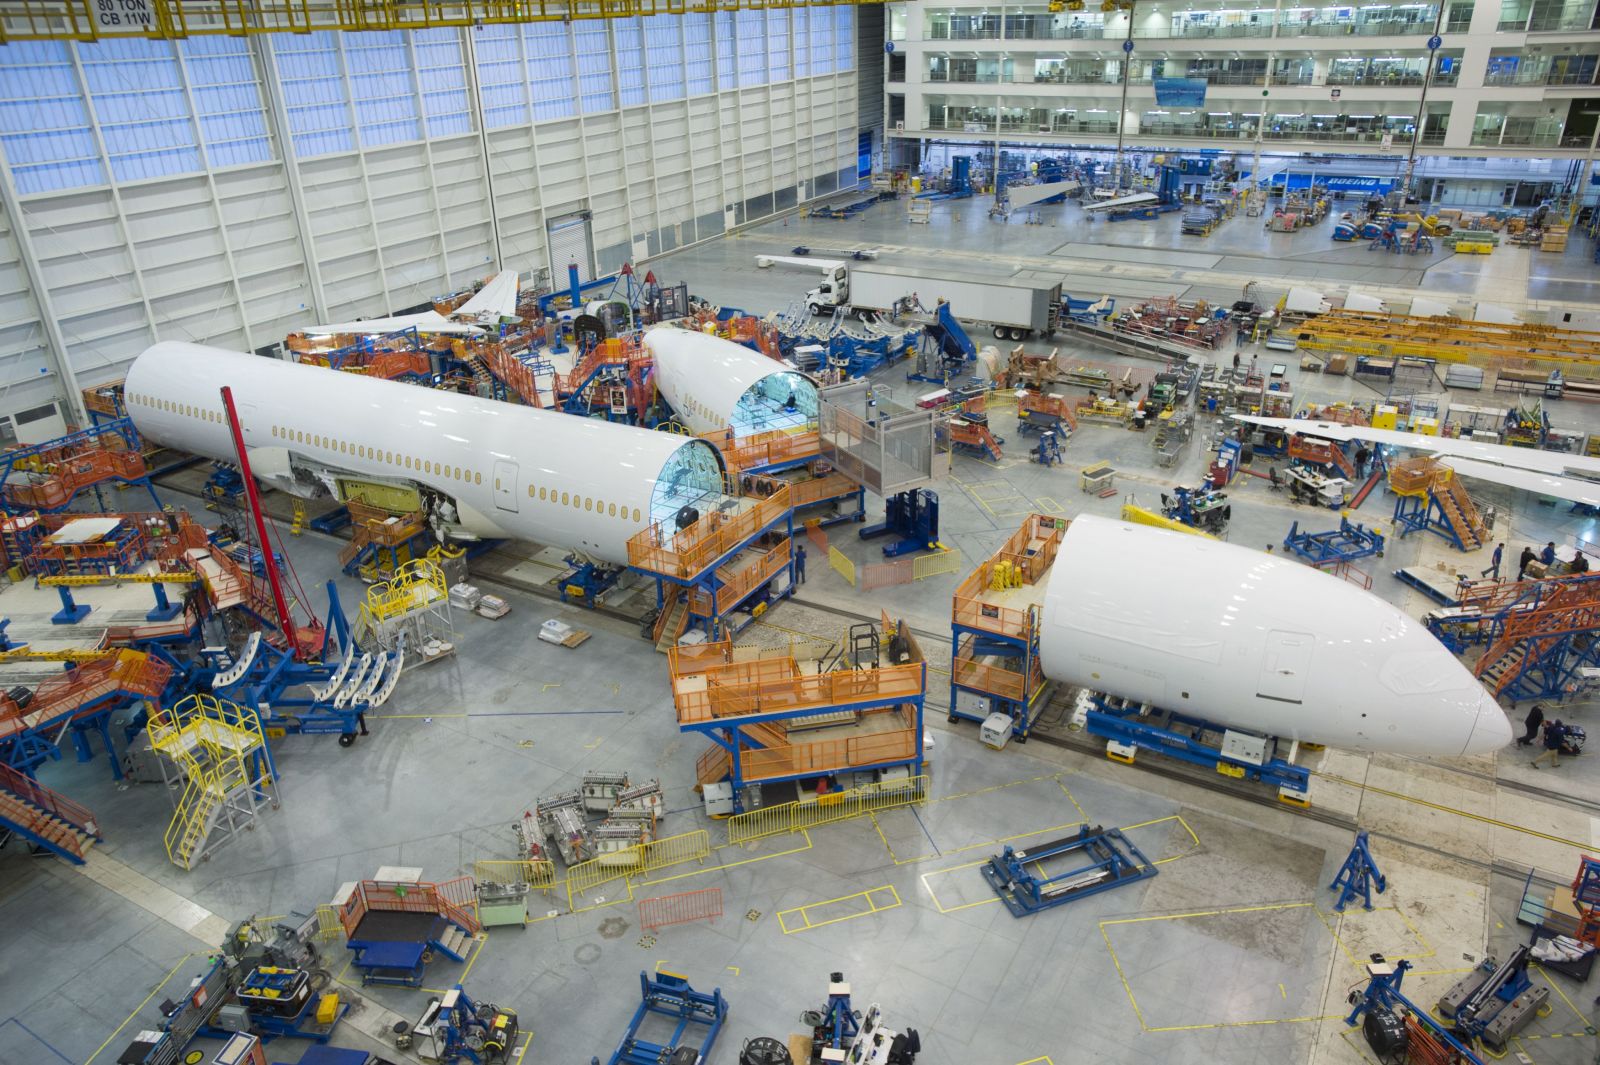 Boeing said it will cut production of the 787 to 10 planes per month next year. (Photo/file)